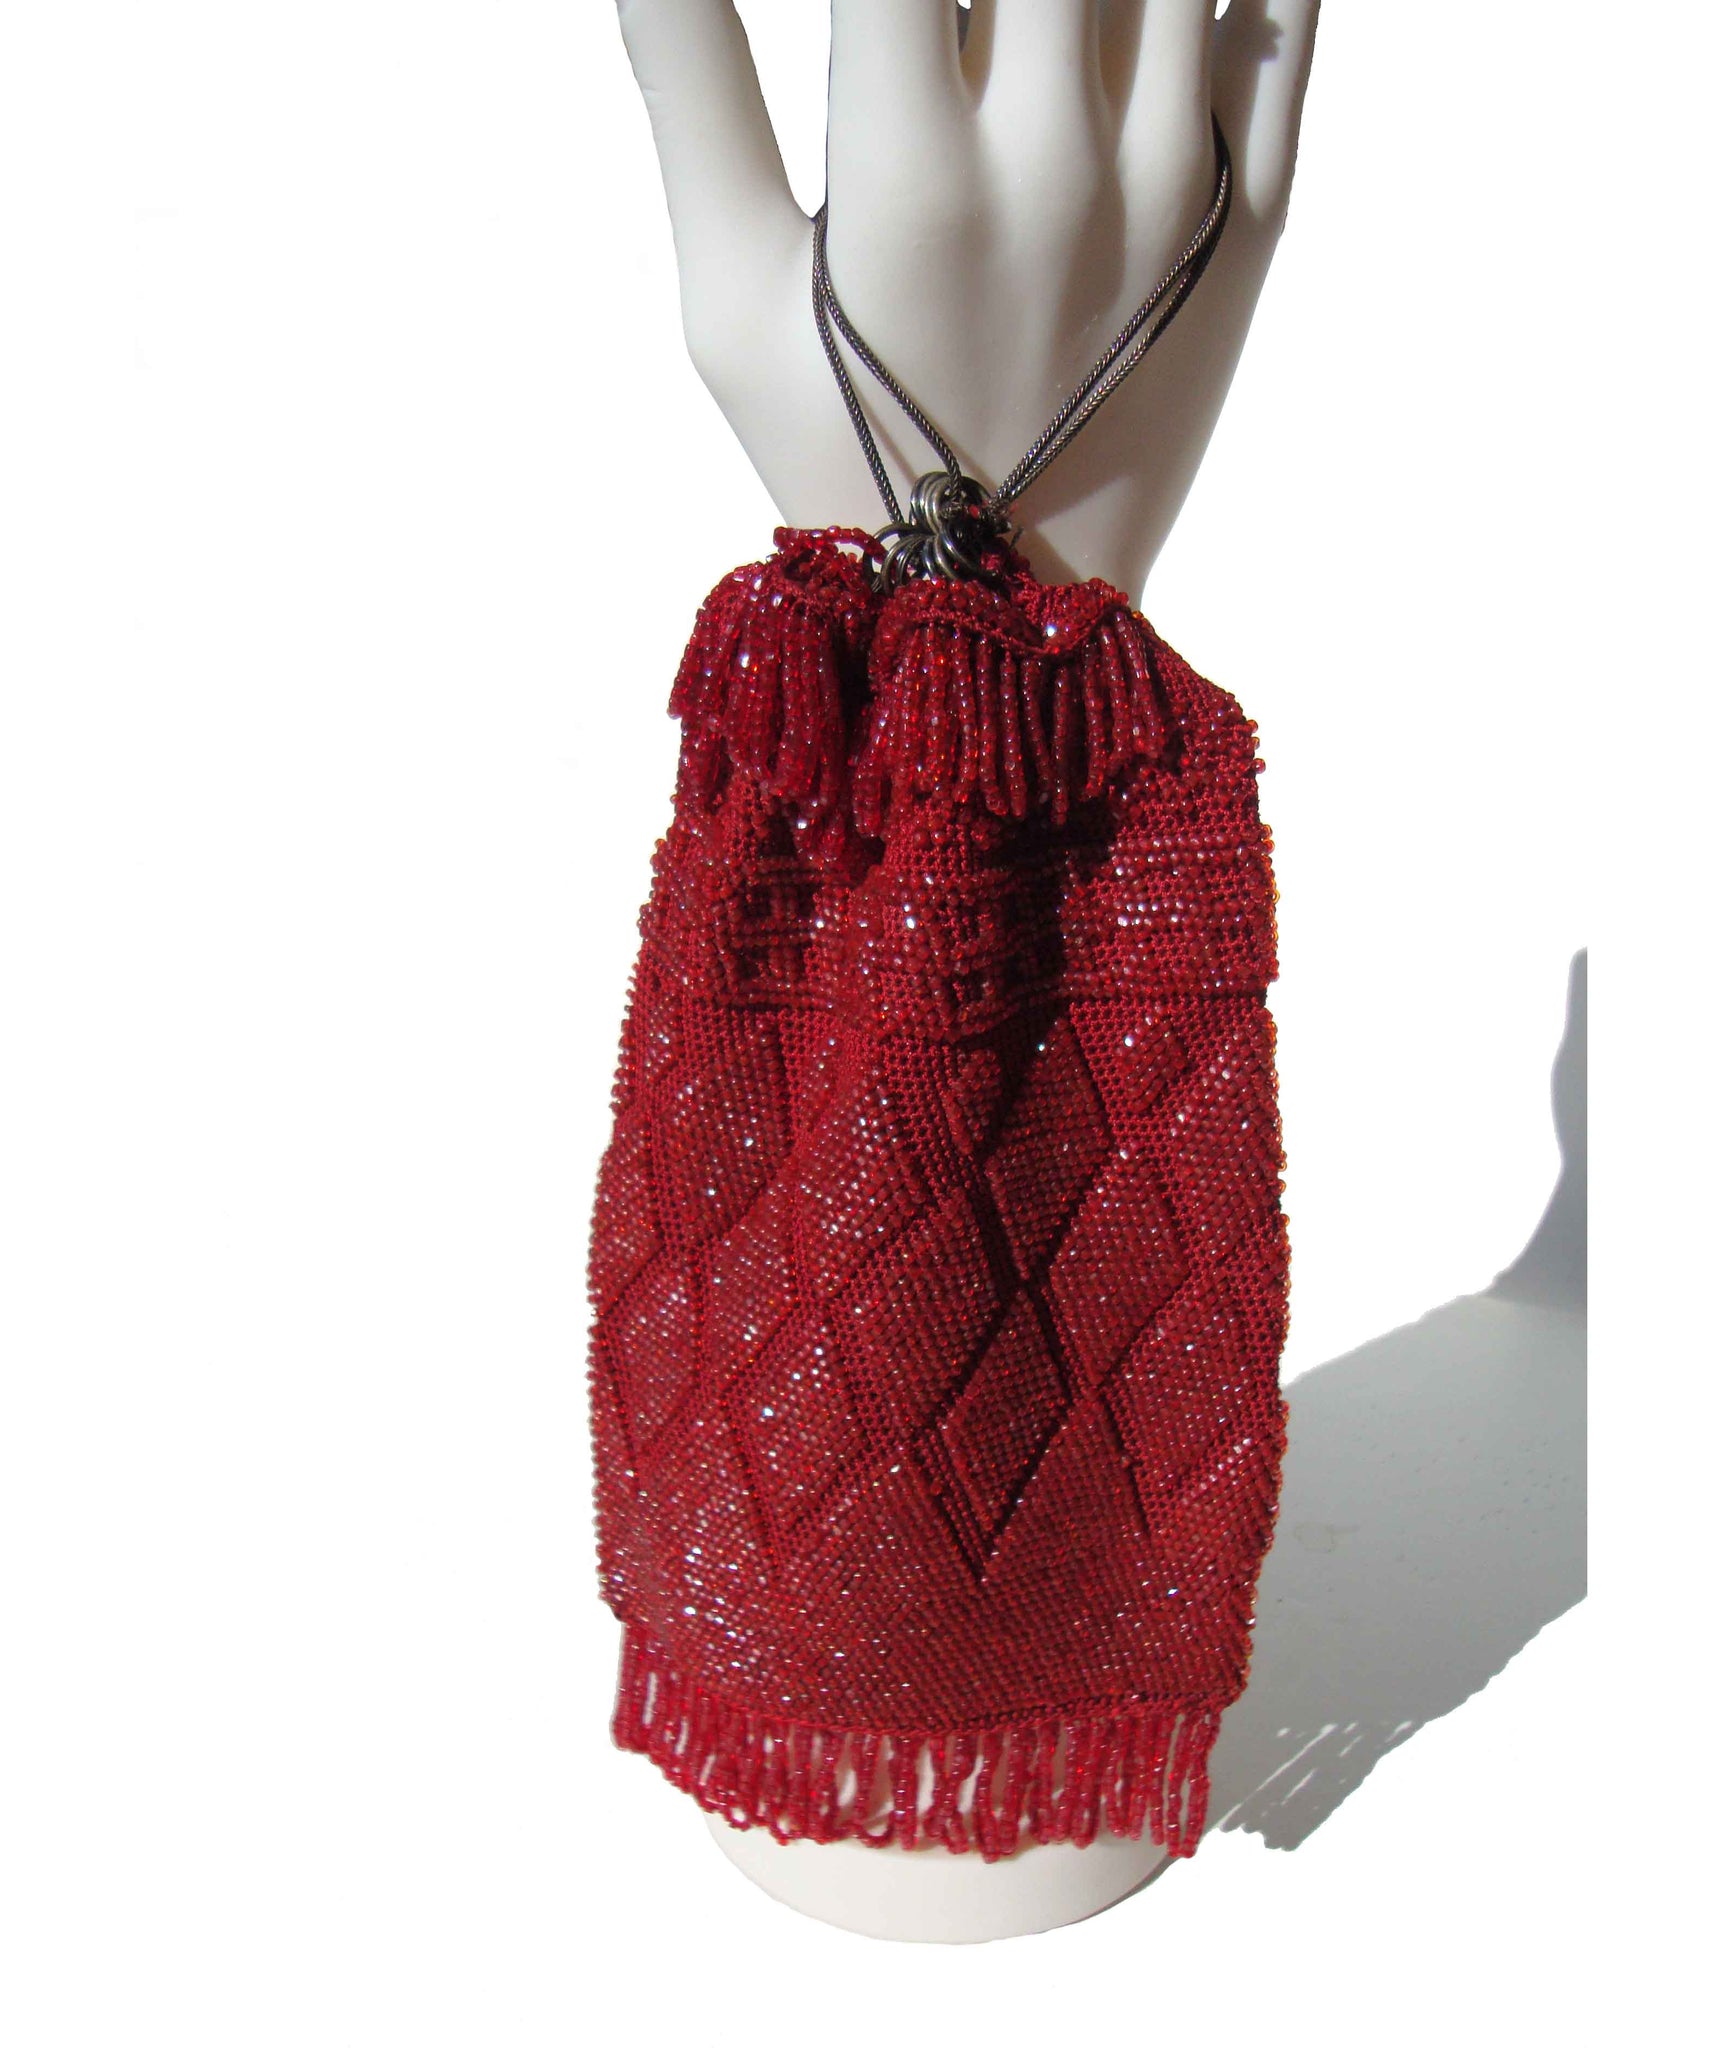 Antique 1920s Red Micro Beaded Purse Flapper Reticule Drawstring Bag